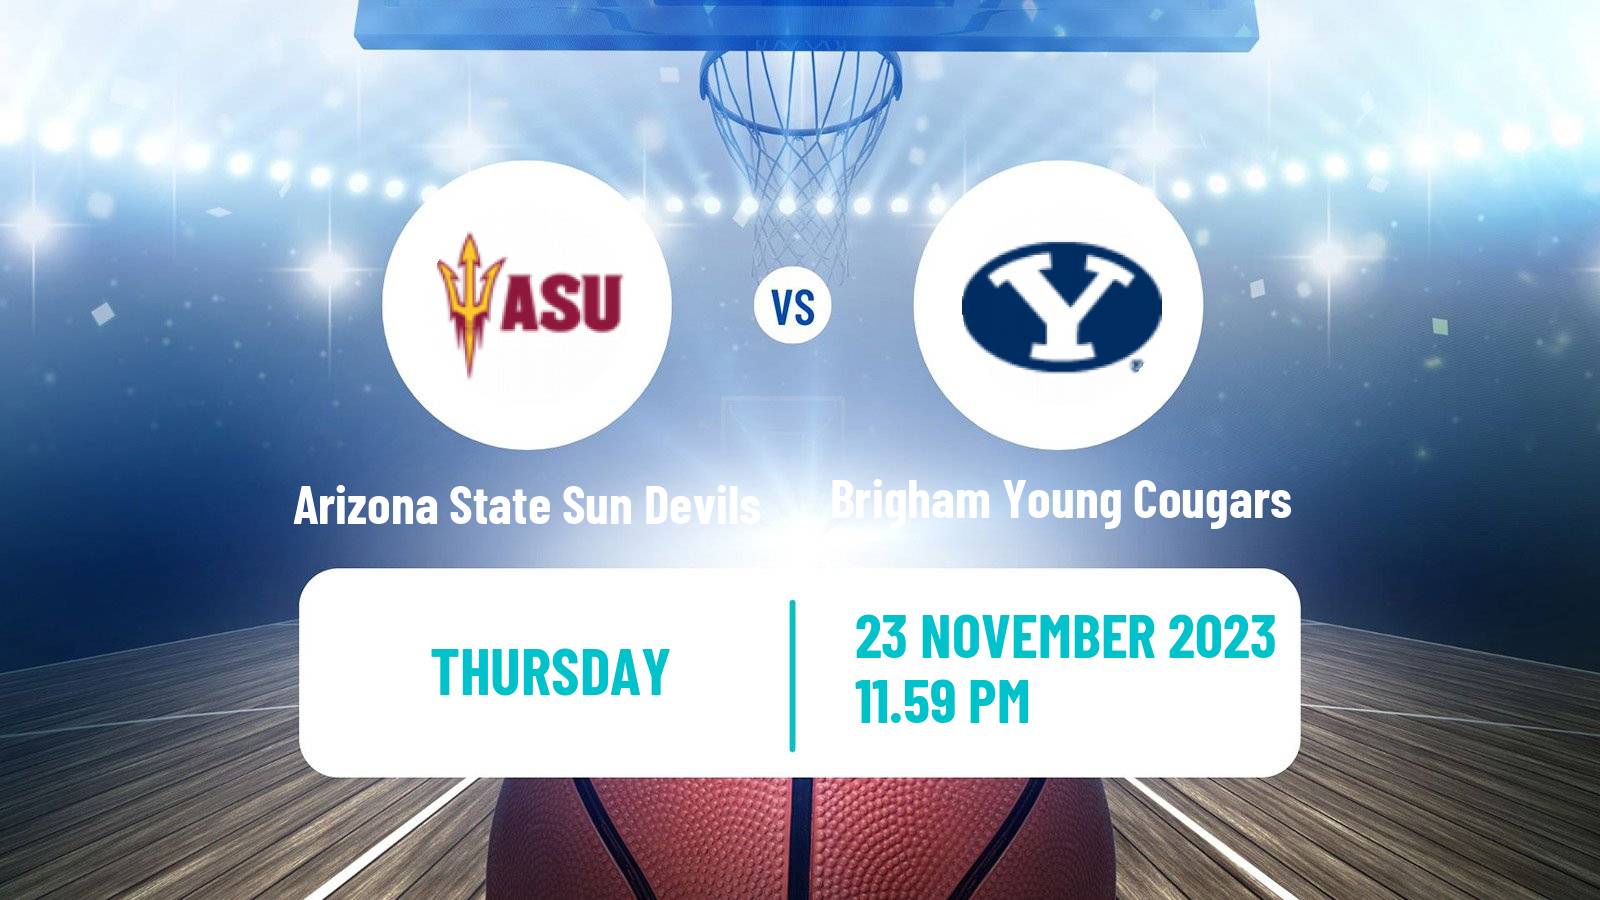 Basketball NCAA College Basketball Arizona State Sun Devils - Brigham Young Cougars